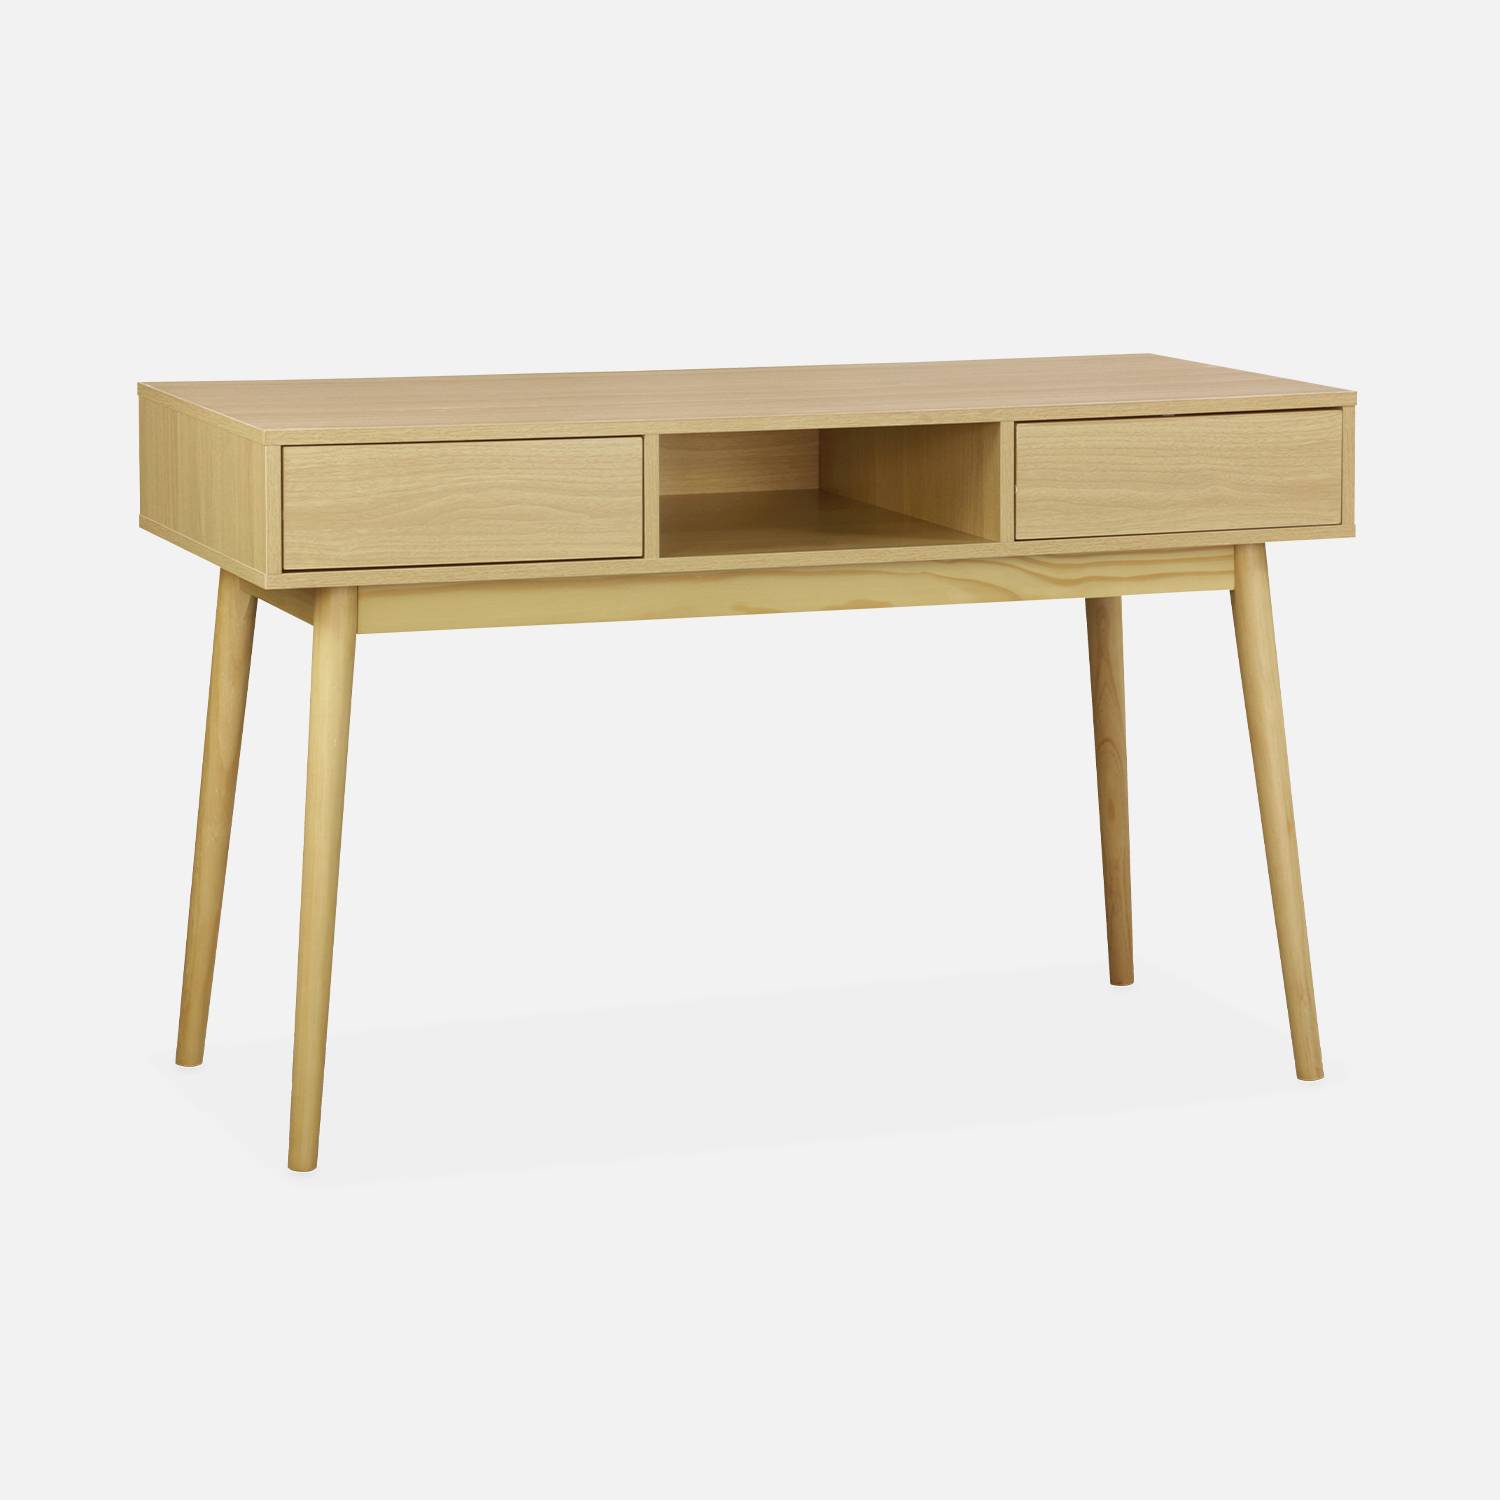 Wood-effect console table with two drawers and one storage nook, 120x48x75cm - Mika - Natural Wood colour,sweeek,Photo2